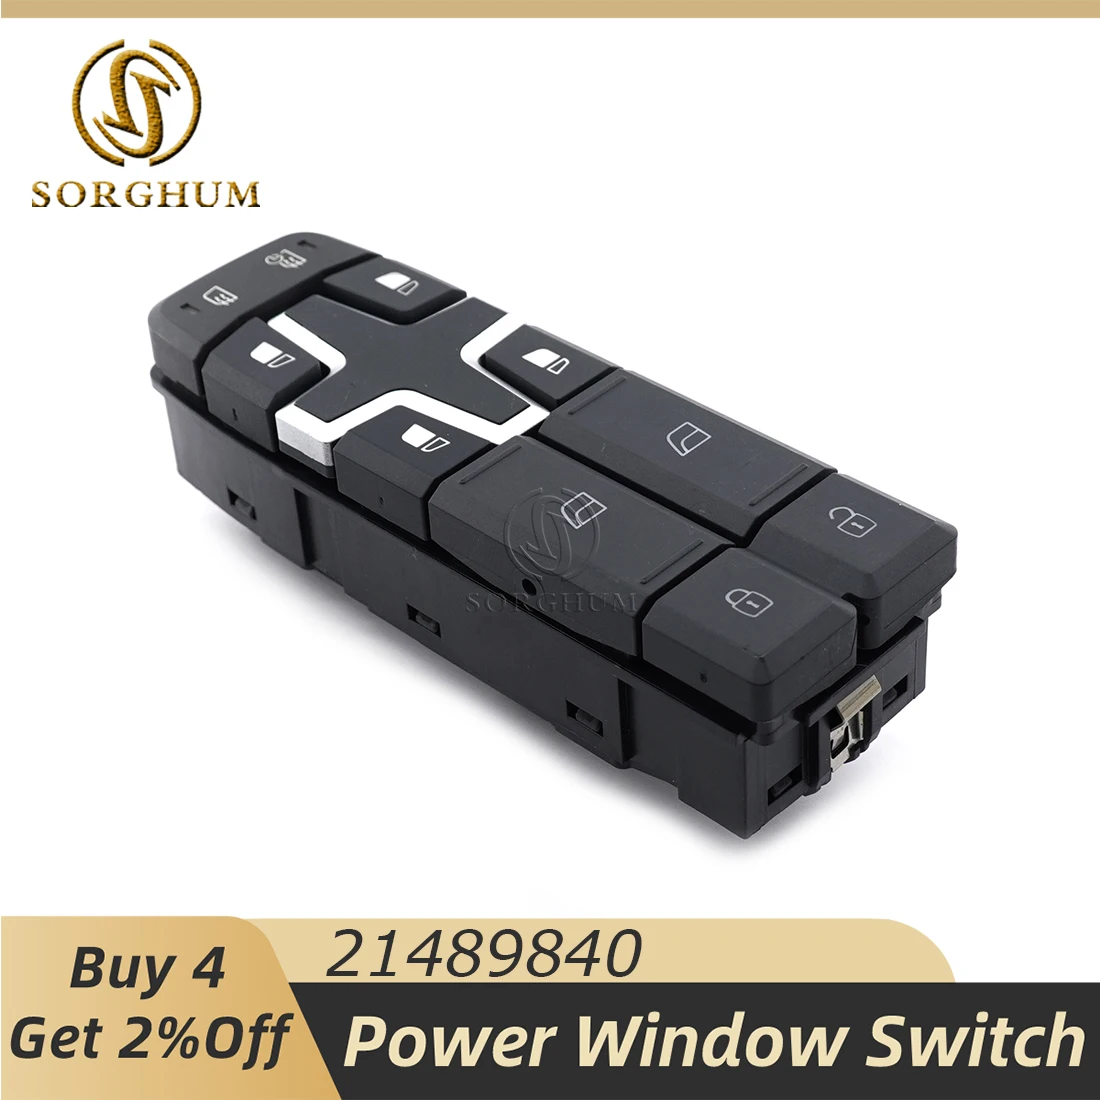 

Sorghum 21489840 Front Left Electric Window Switch Lift Button For Volvo FH FM Series Truck 1998 2013 22154285 14050579 22154286